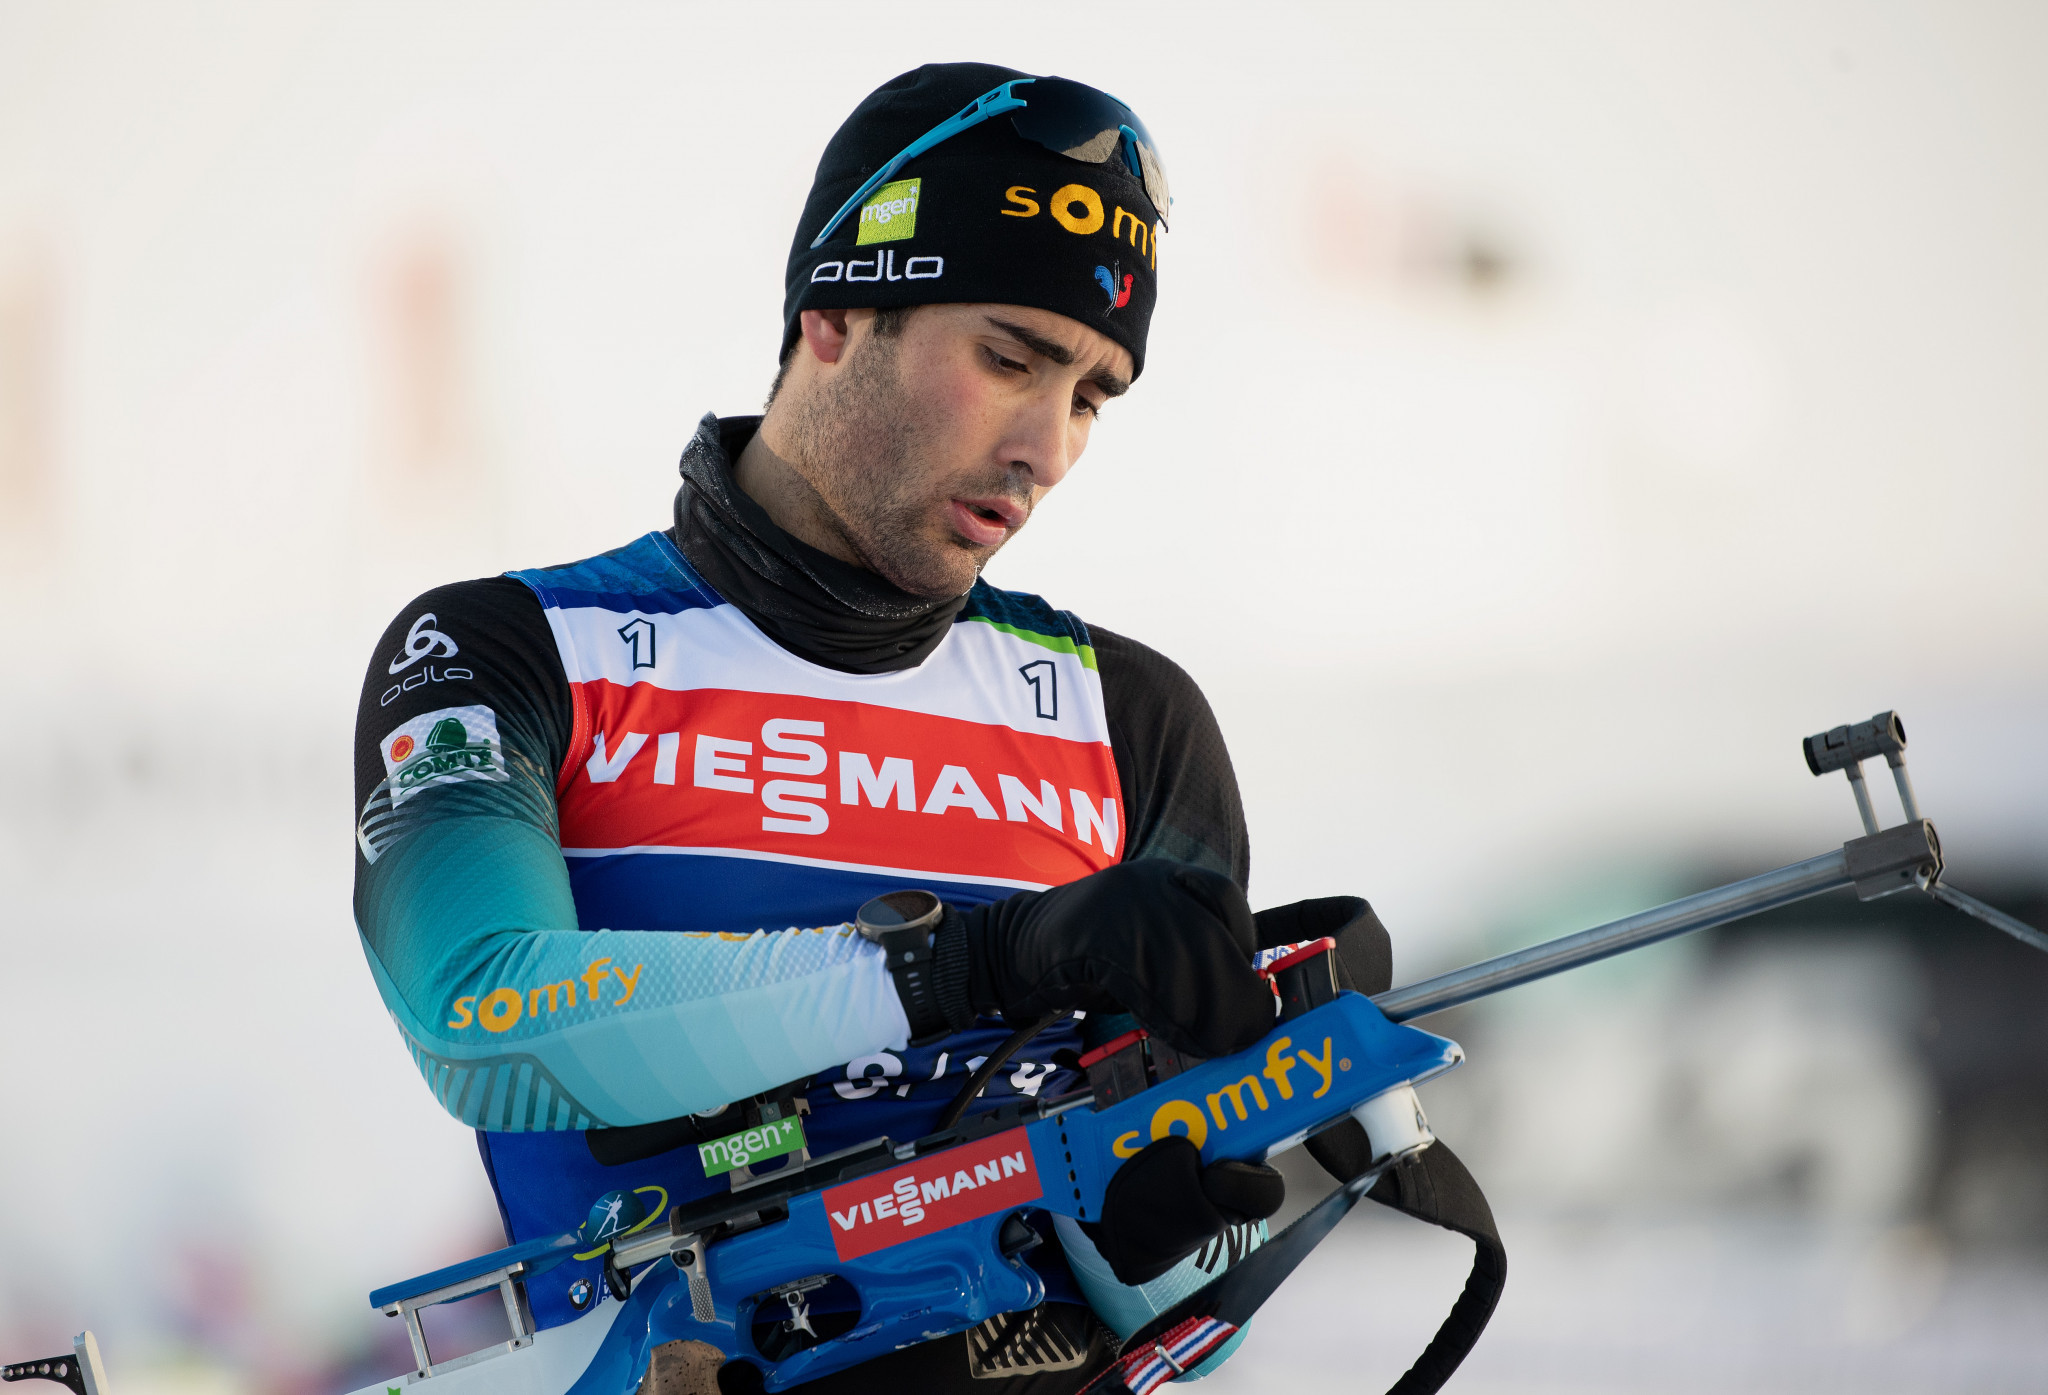 Martin Fourcade shot clean at the range but had to make do with second spot ©Getty Images